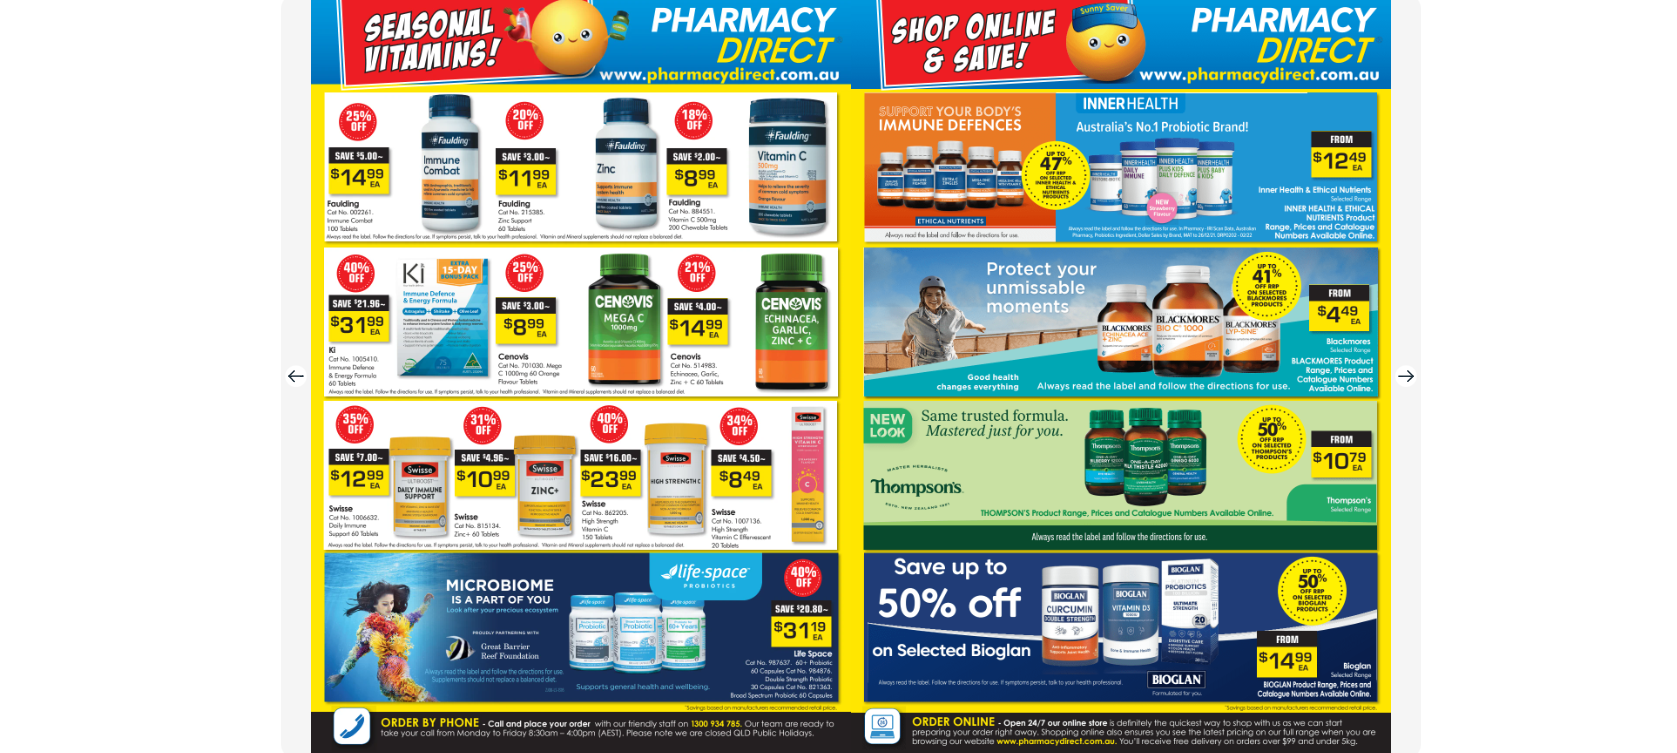 Pharmacy Direct Winter saving catalogue Up to 50% OFF on vitamins, supplements & more